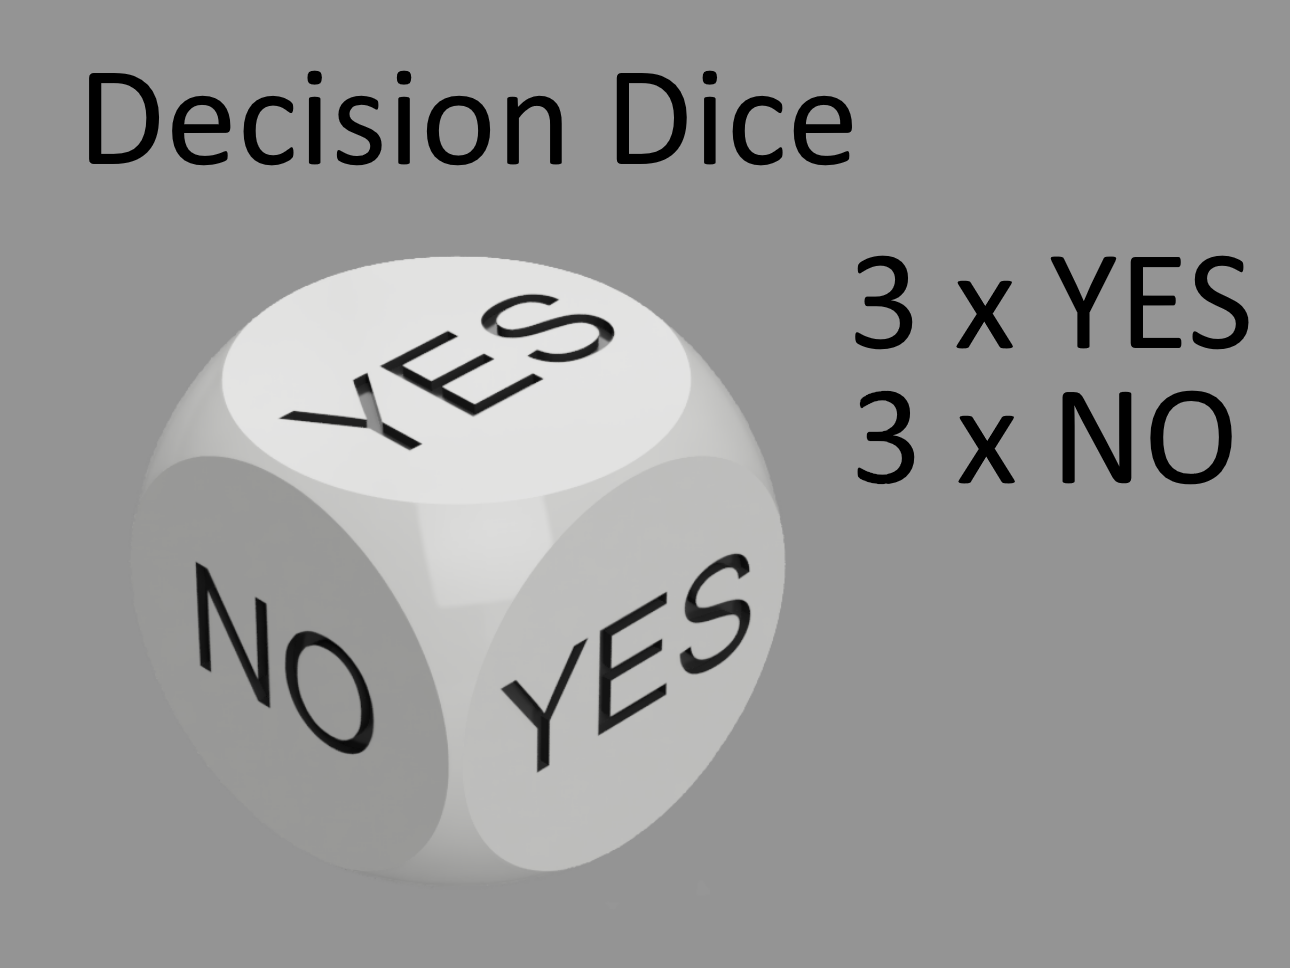 Yes No - Decision Dice